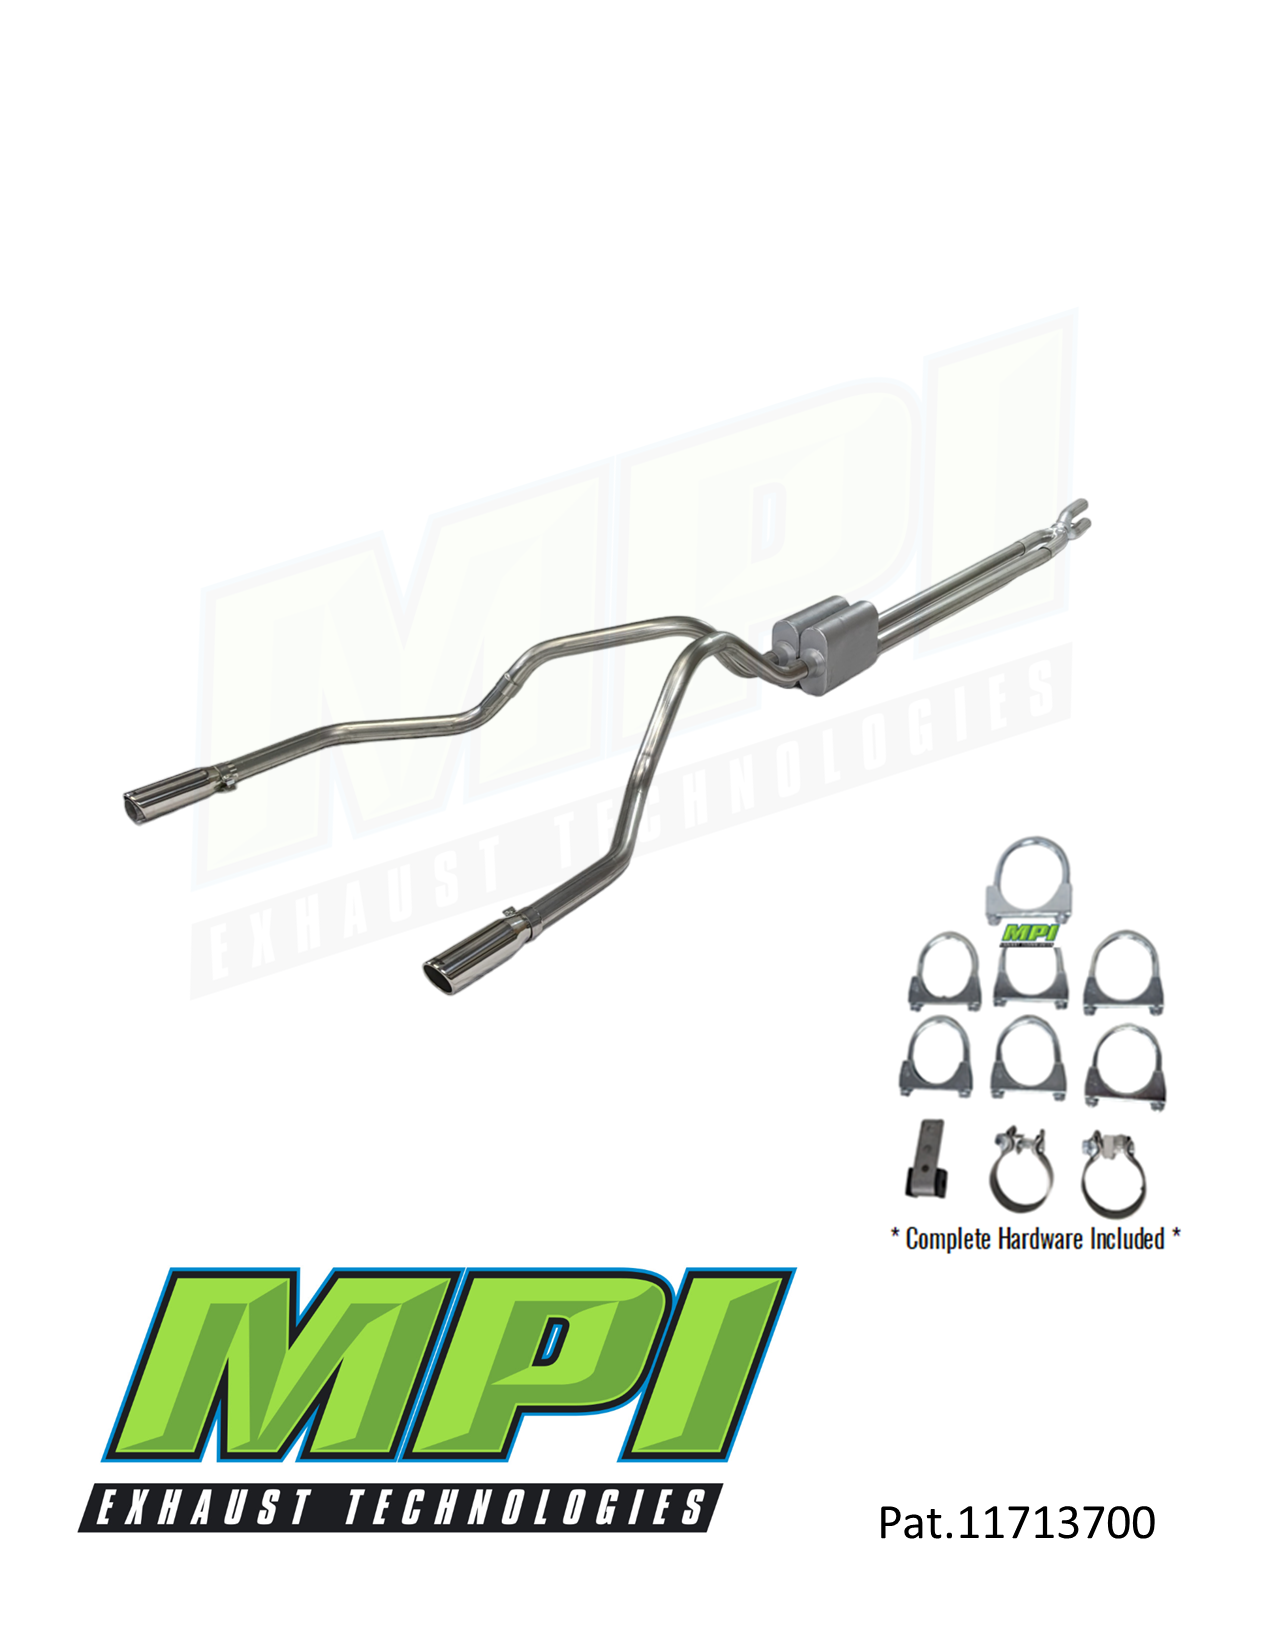 Ford 6.2L 2010-2016 Truck Dual Exhaust Kits - Clamp-on